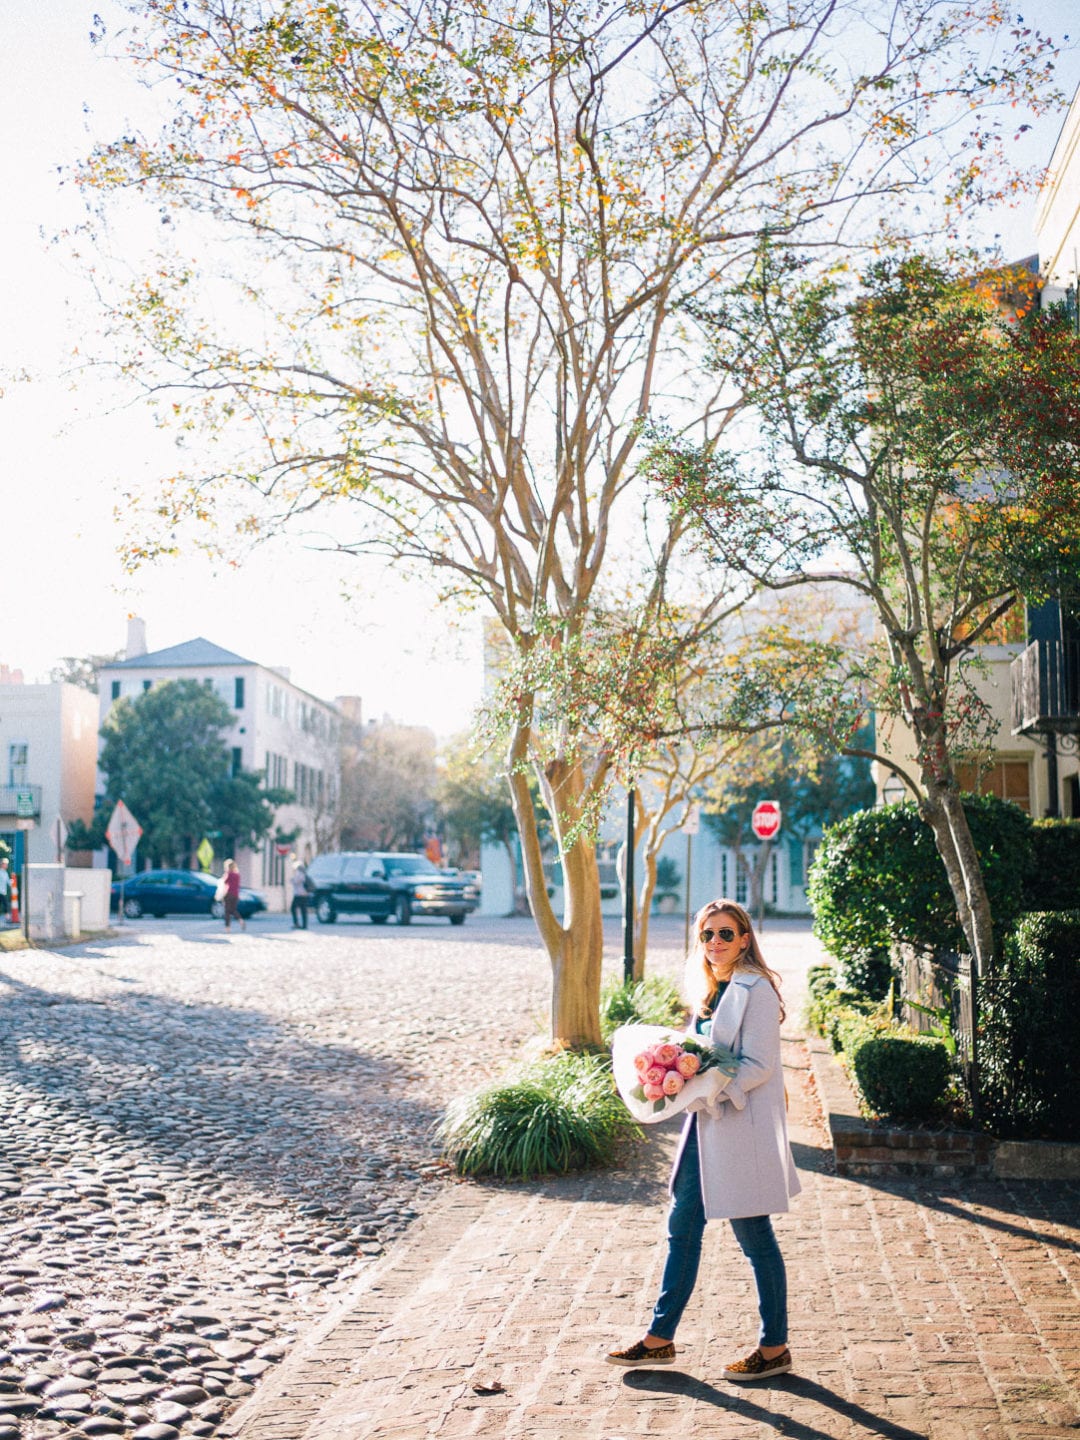 A Few Favorite Spots in Charleston with Stori Modern! - Lucy Cuneo